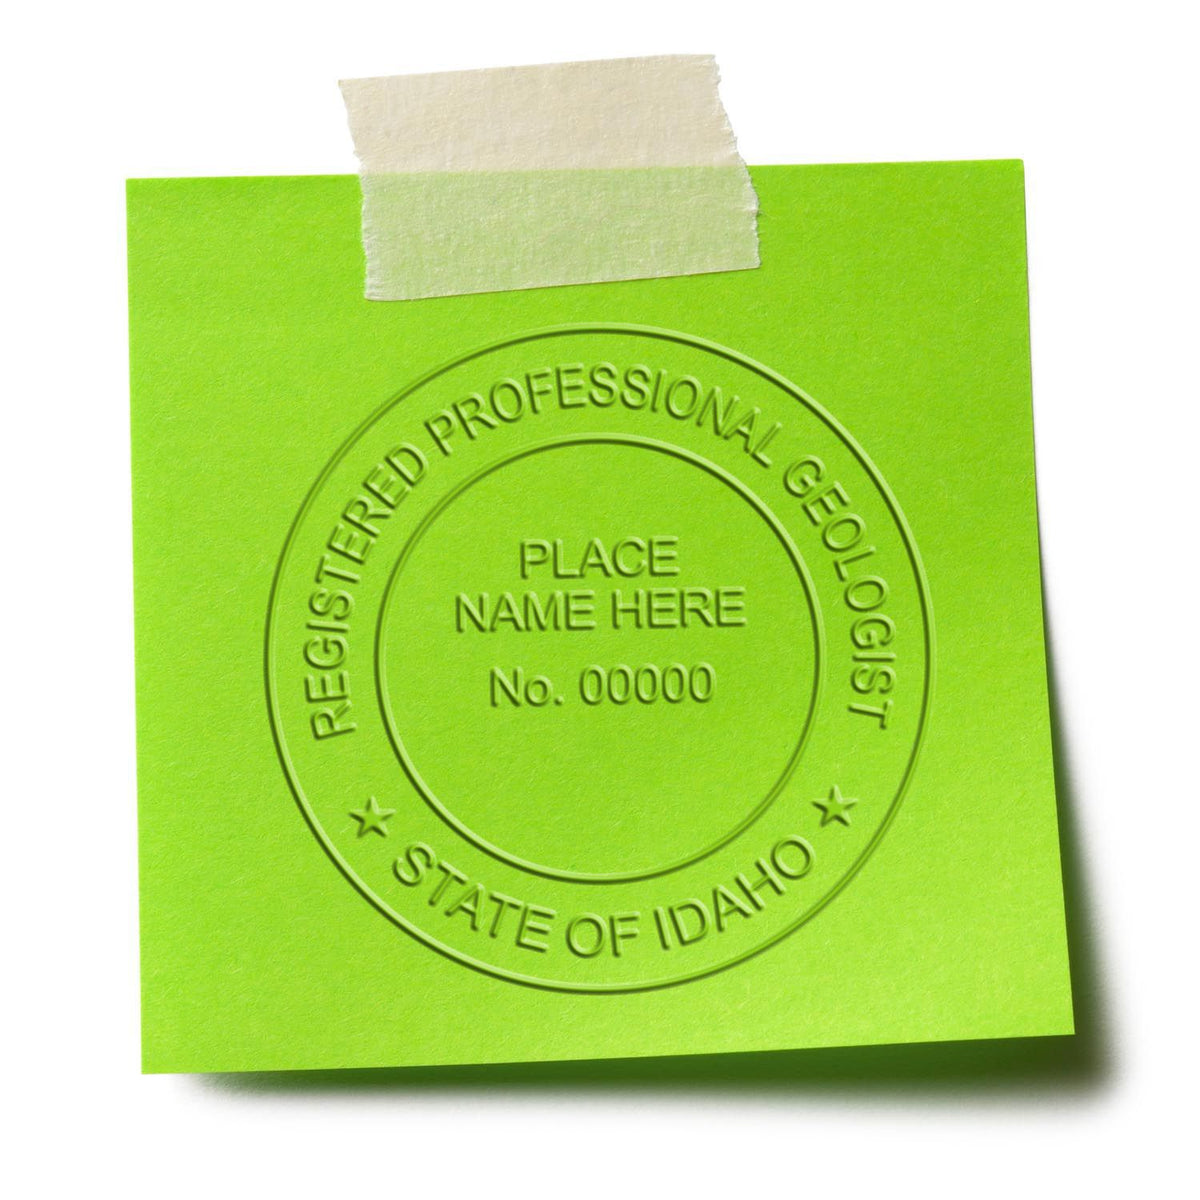 Another Example of a stamped impression of the Handheld Idaho Professional Geologist Embosser on a office form